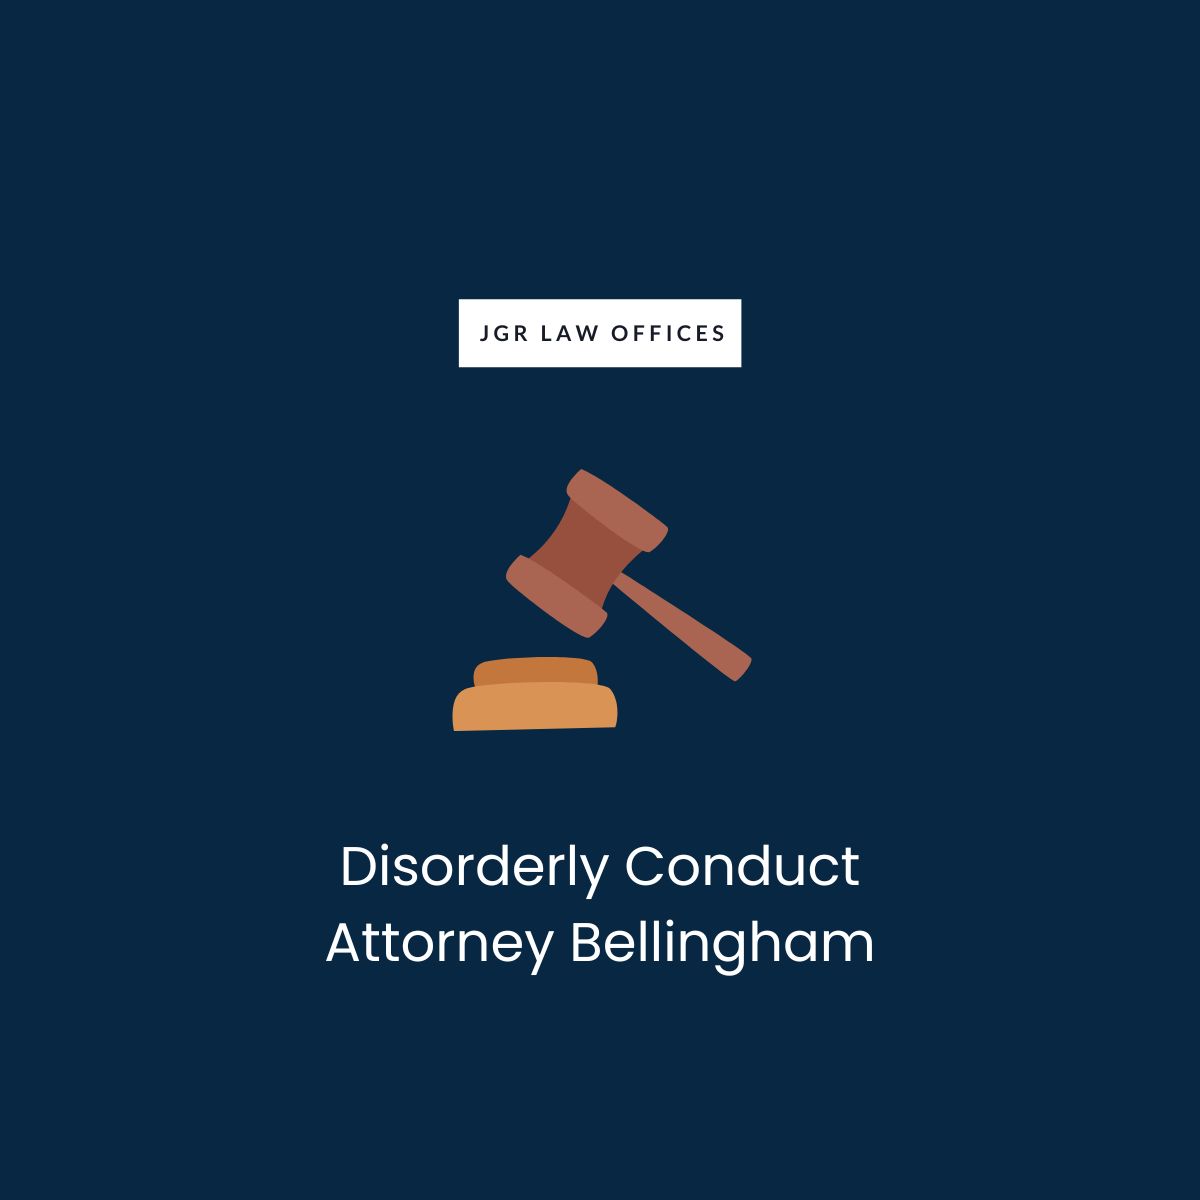 Disorderly Conduct Attorney Bellingham